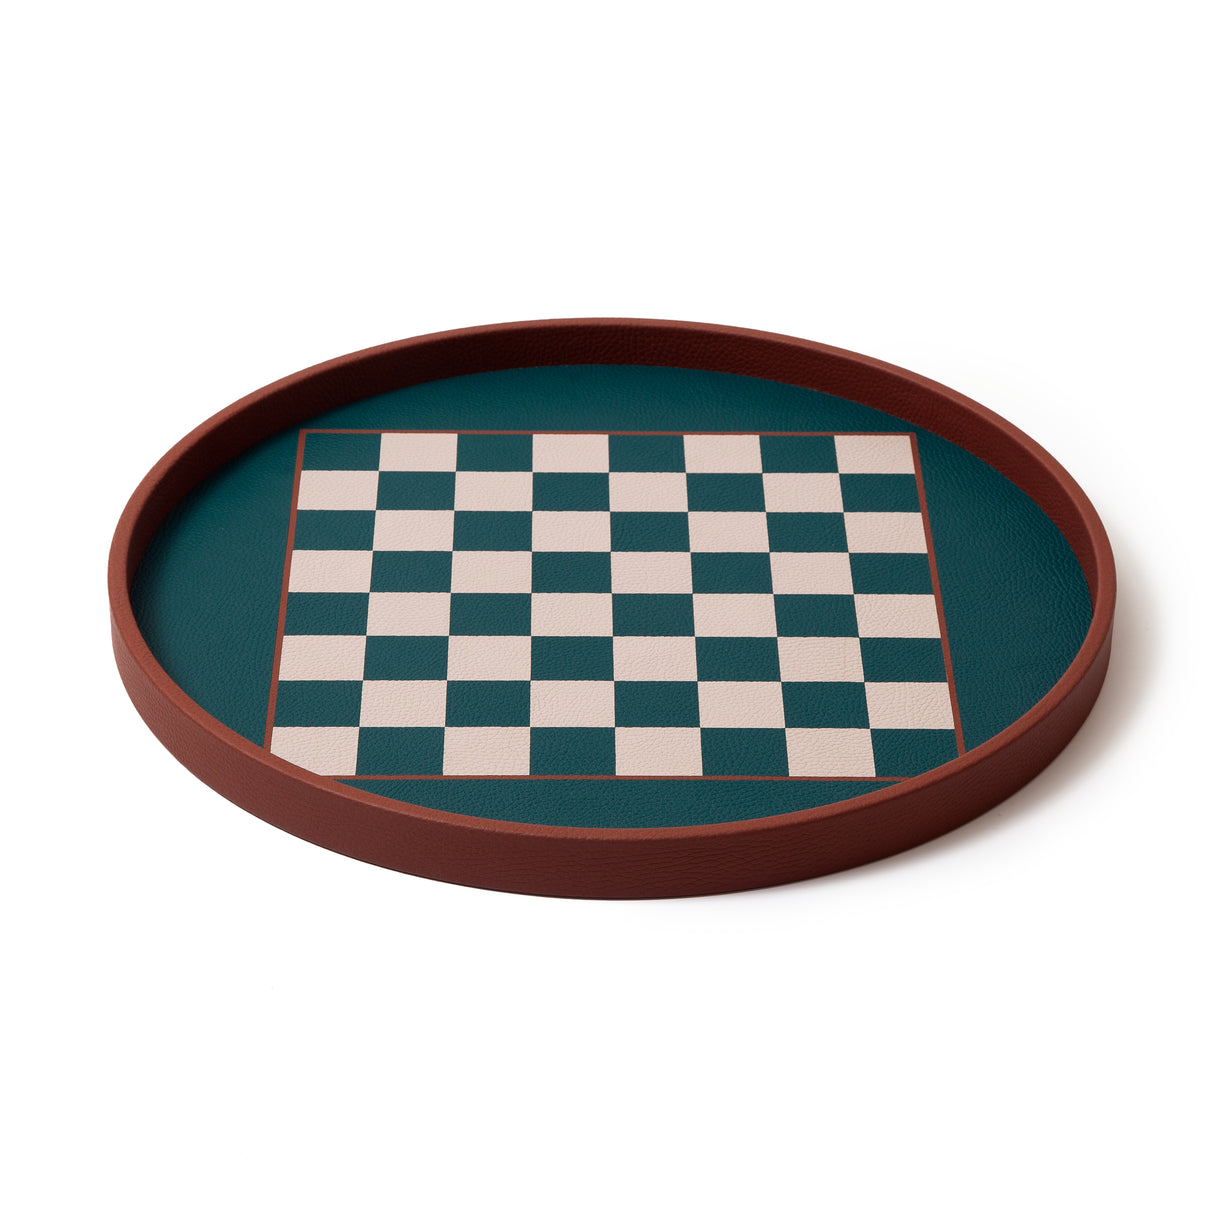 Chess in a tray. Madame's newest and most playful tray in season's colors.